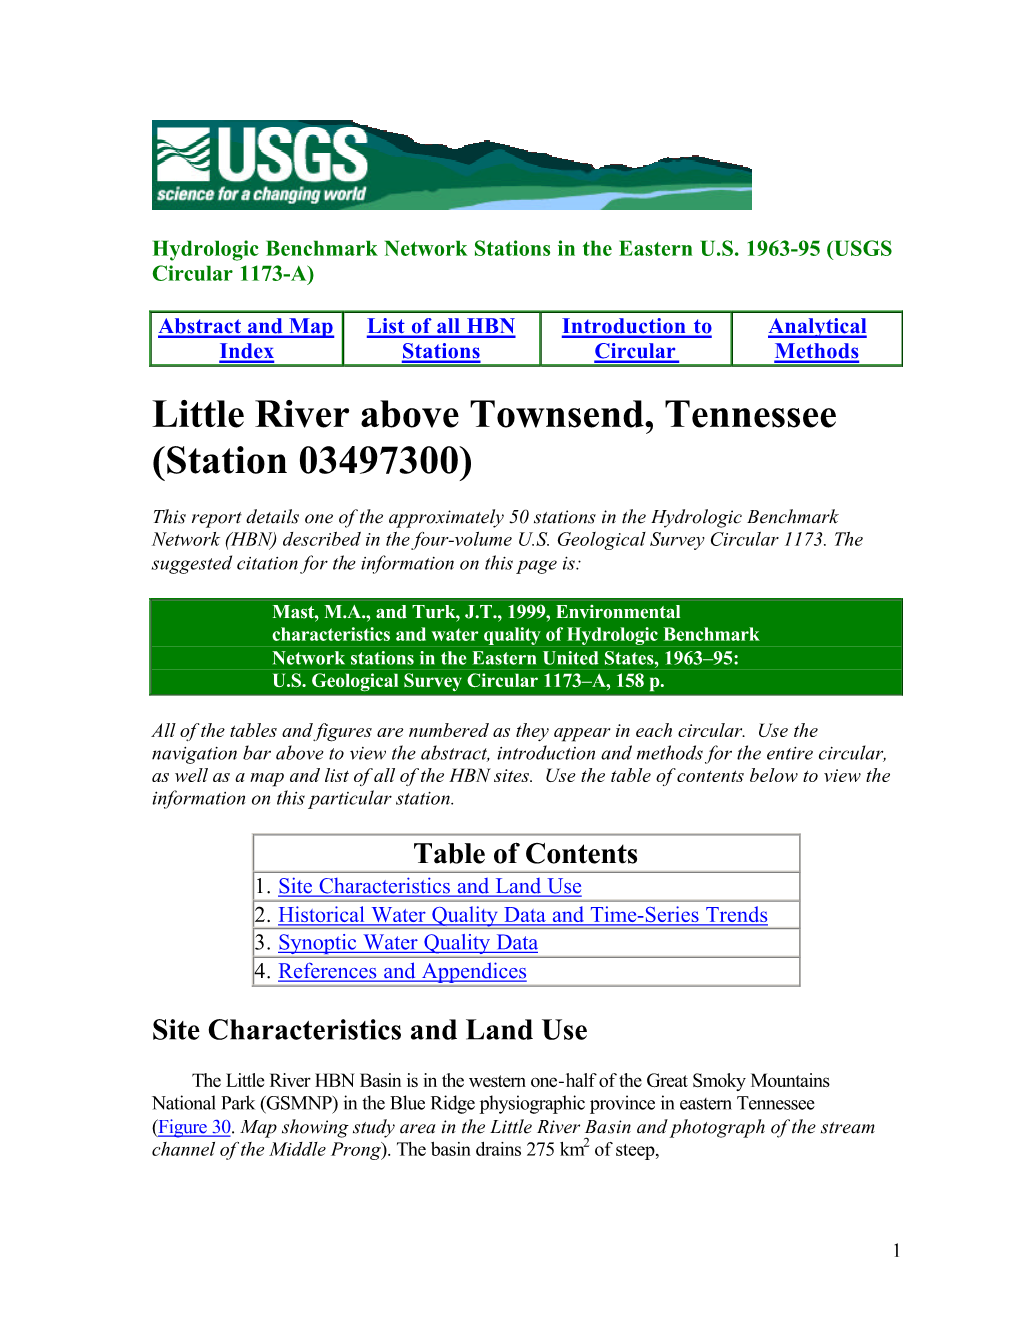 Little River Above Townsend, Tennessee (Station 03497300)